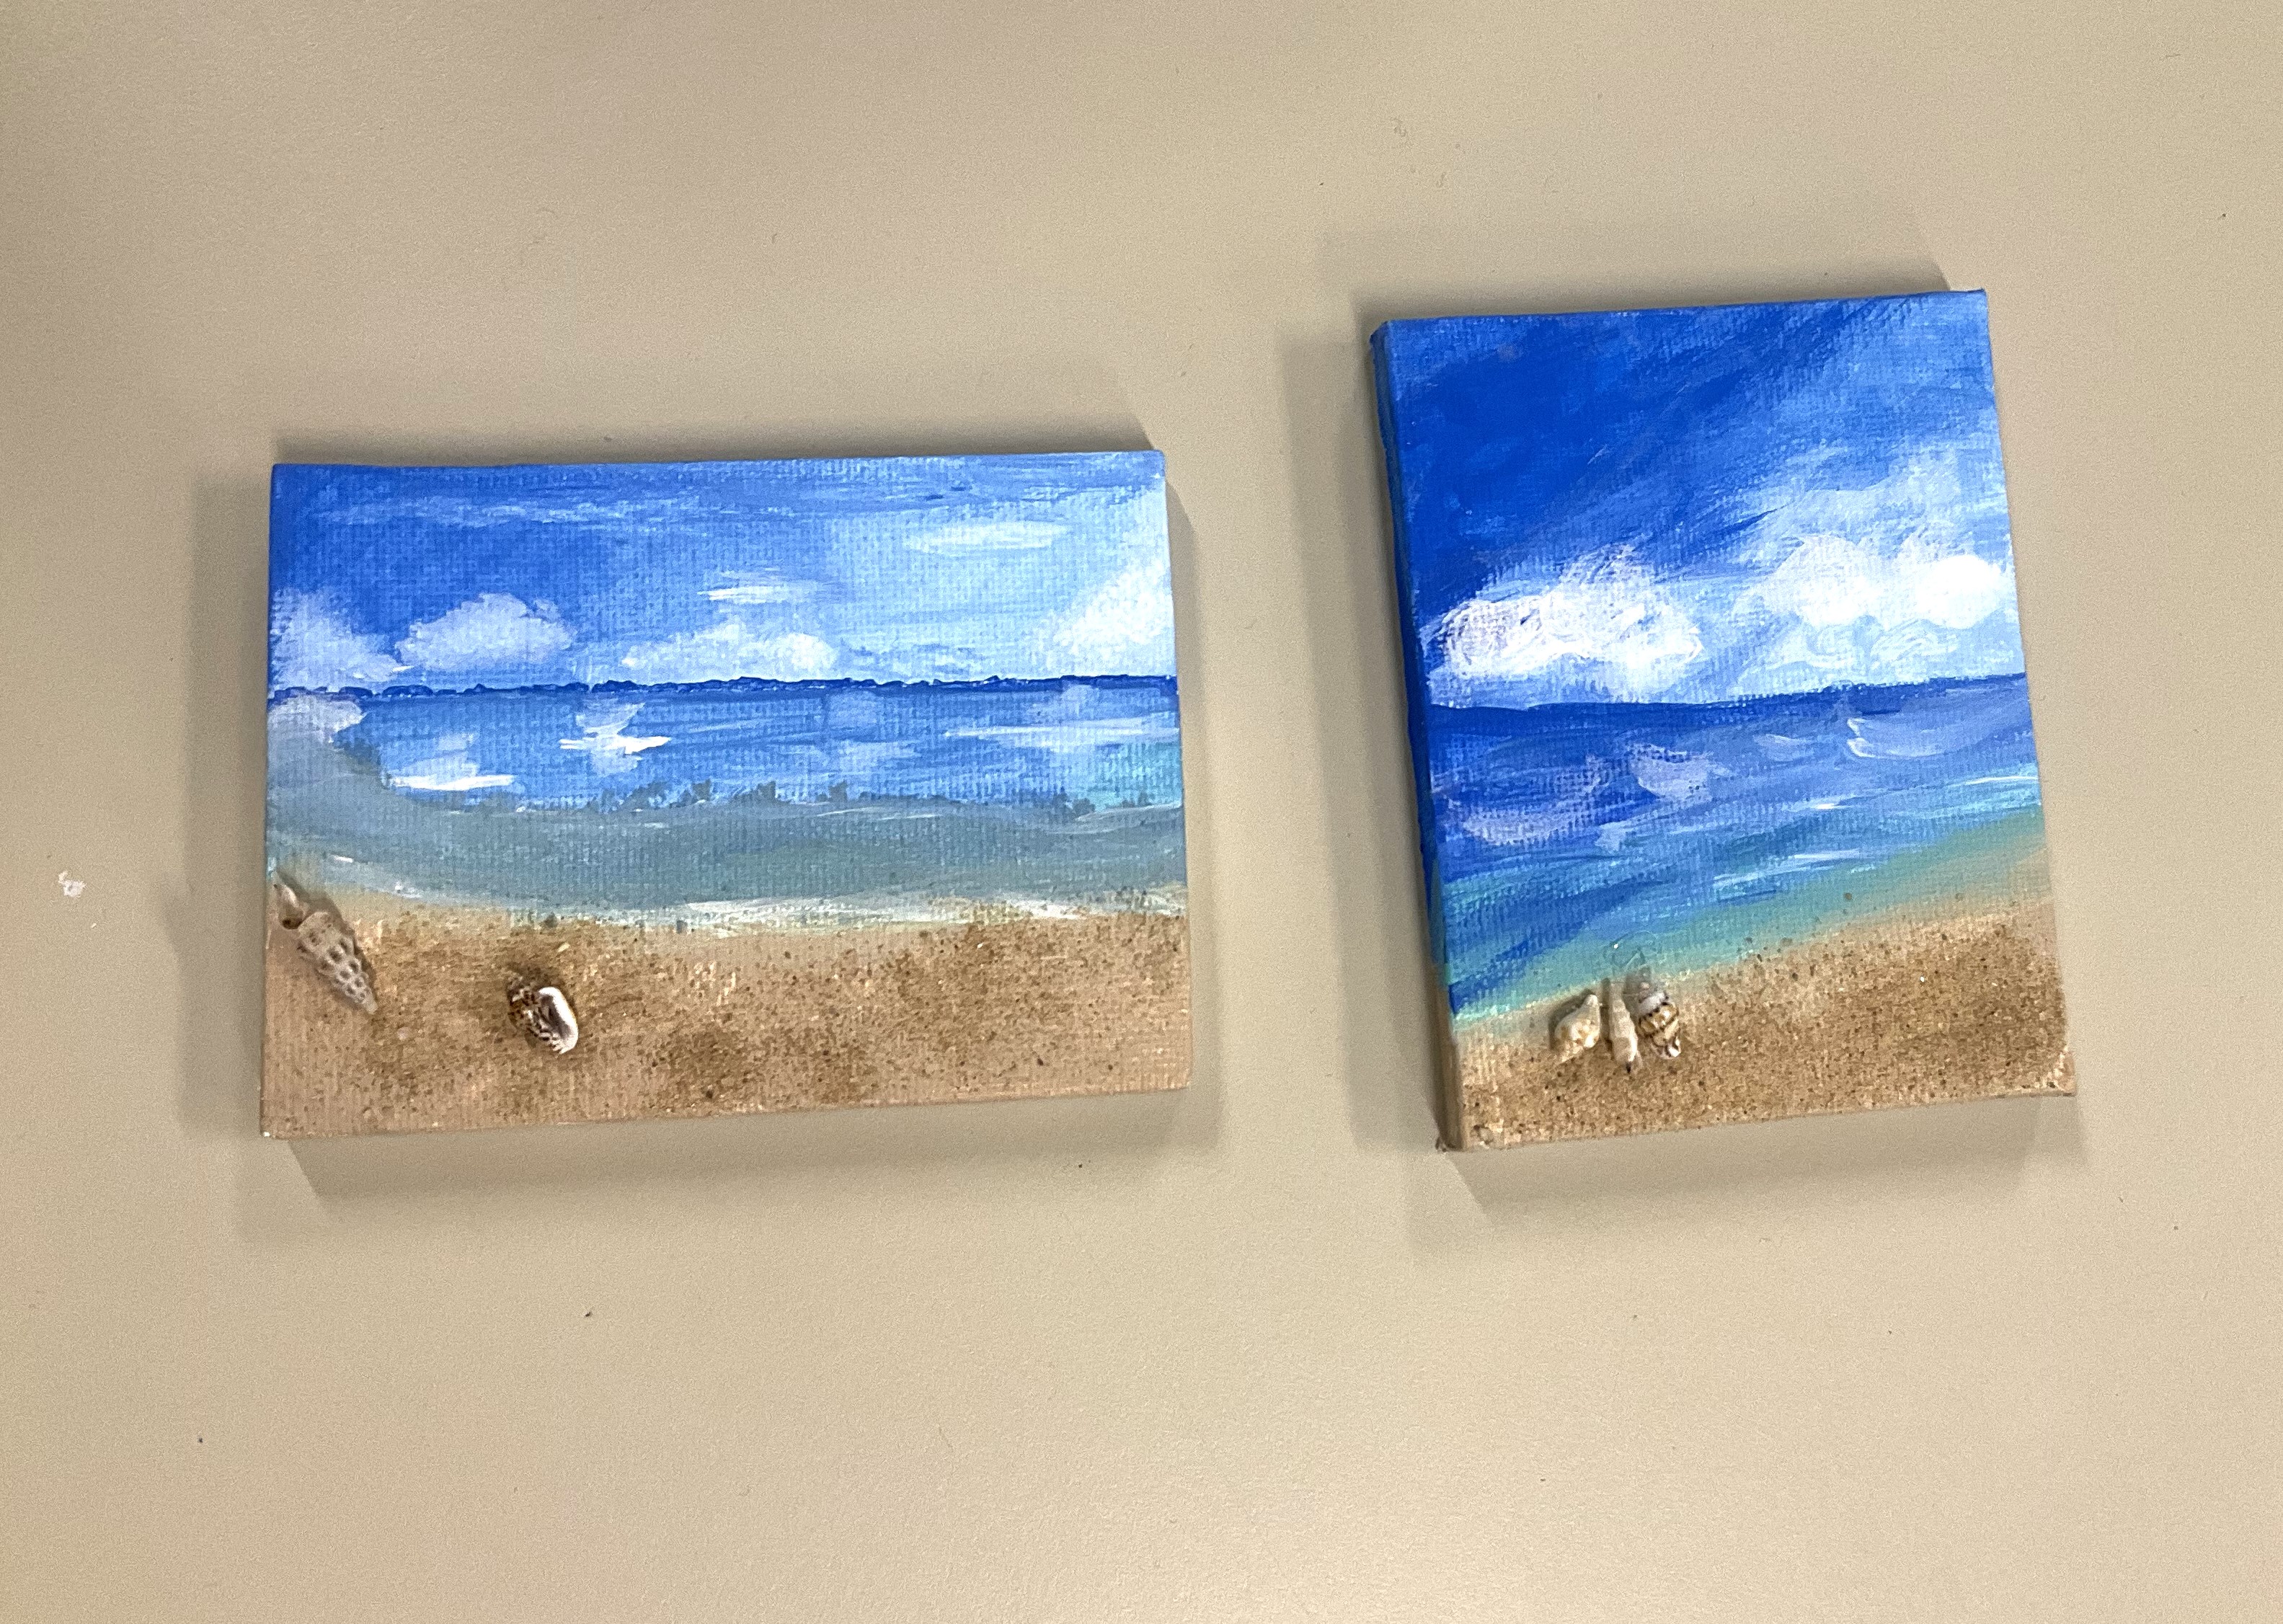 2 small canvasses with a painting of a beach